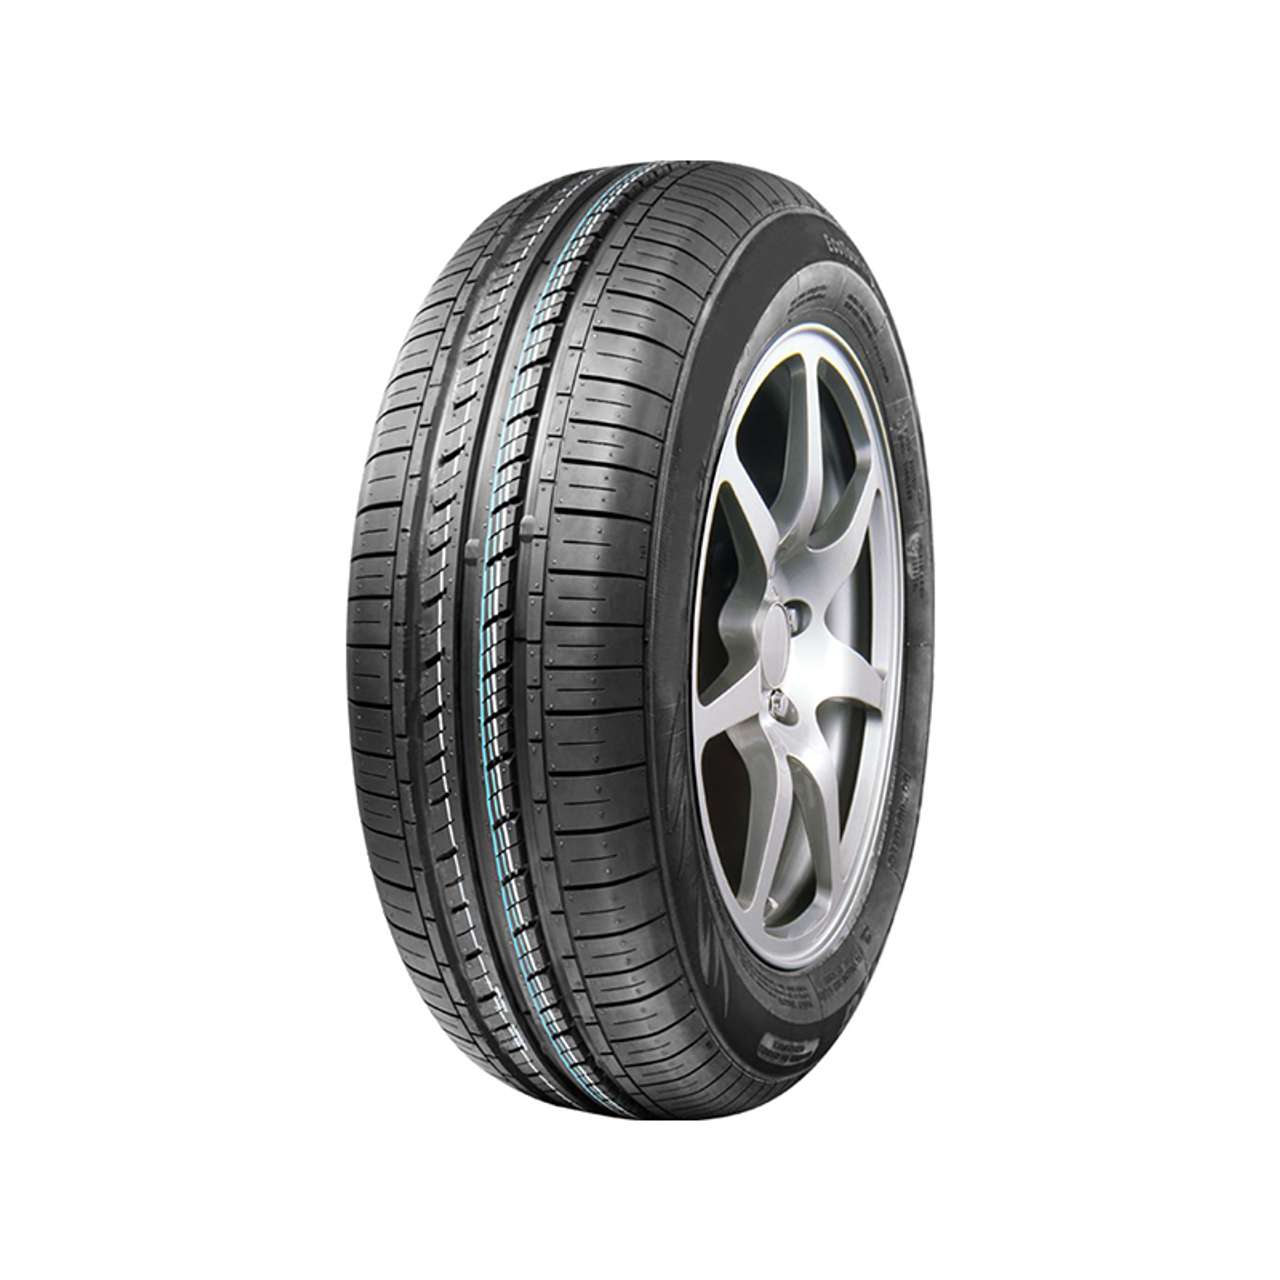 STAR PERFORMER COMET 165/70R14 81T BSW